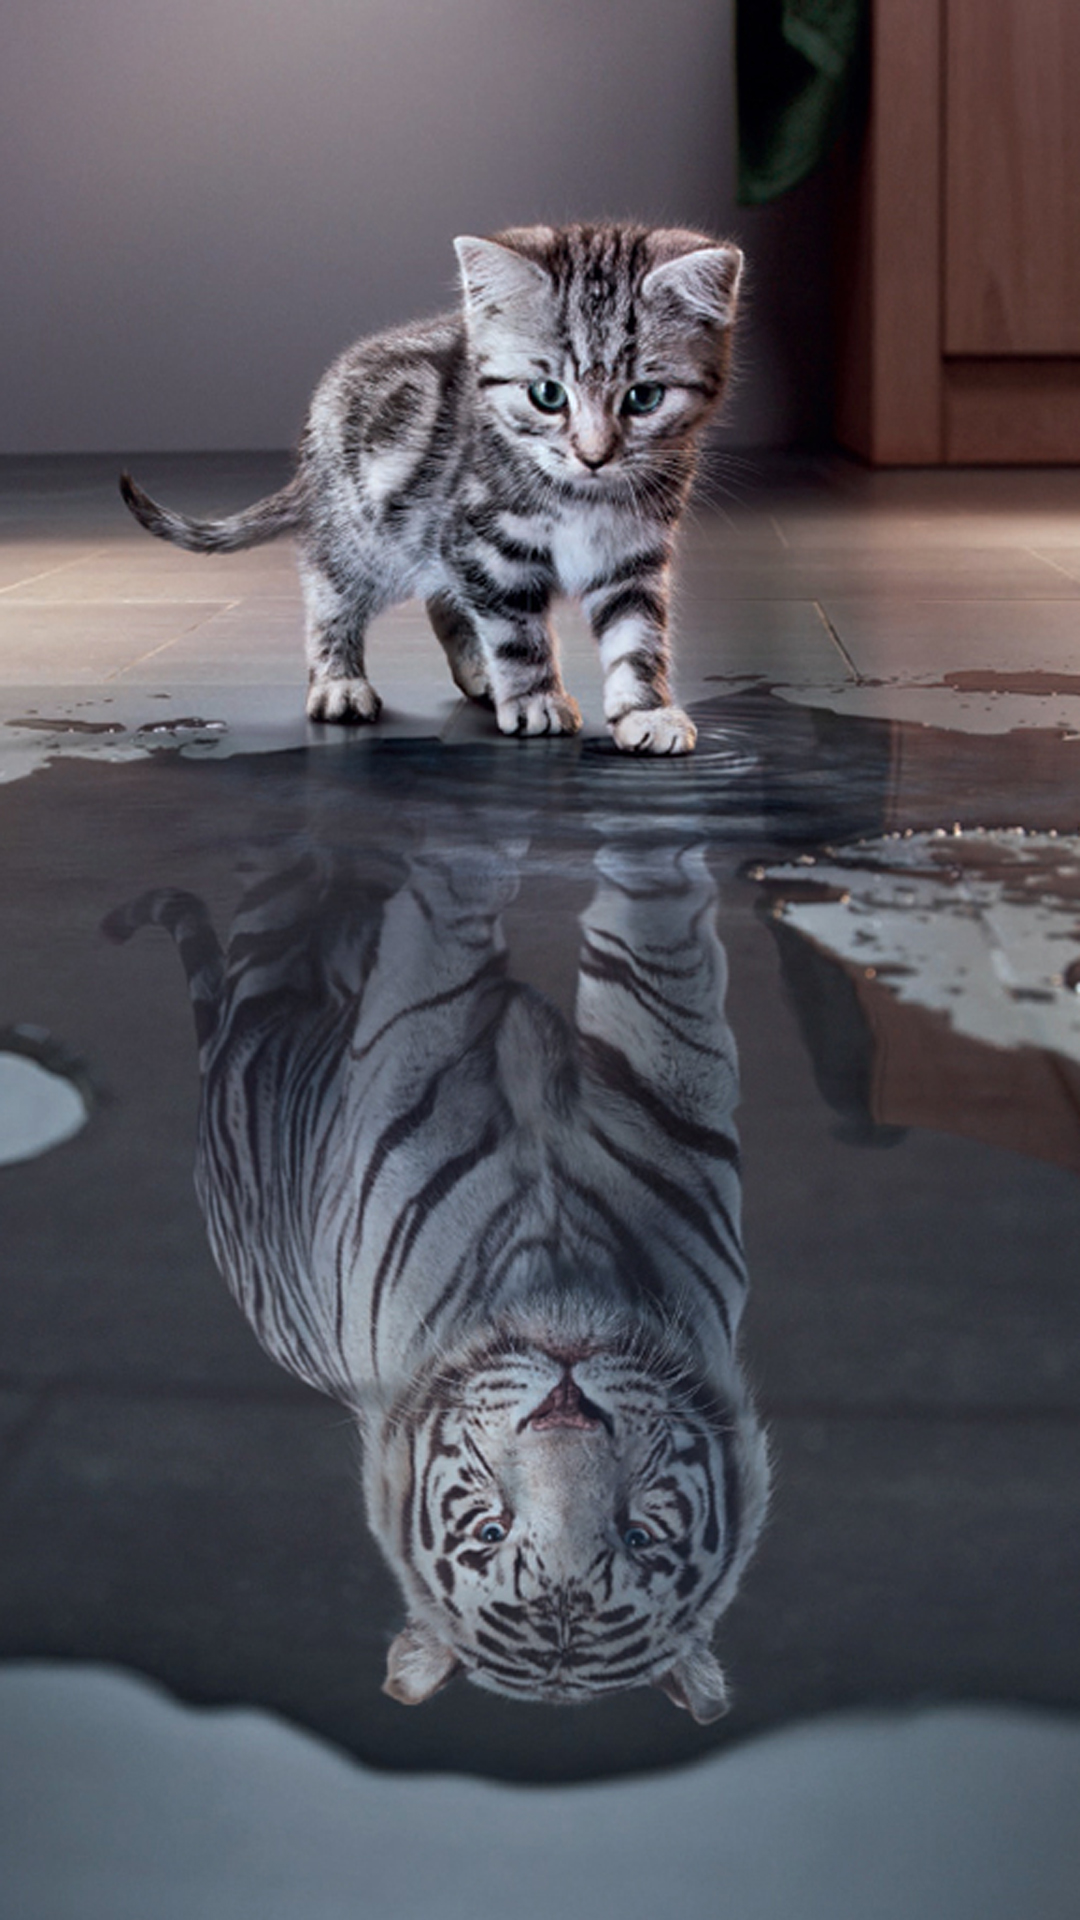 white tiger, kitten, animal, cat, reflection, puddle, cats phone background